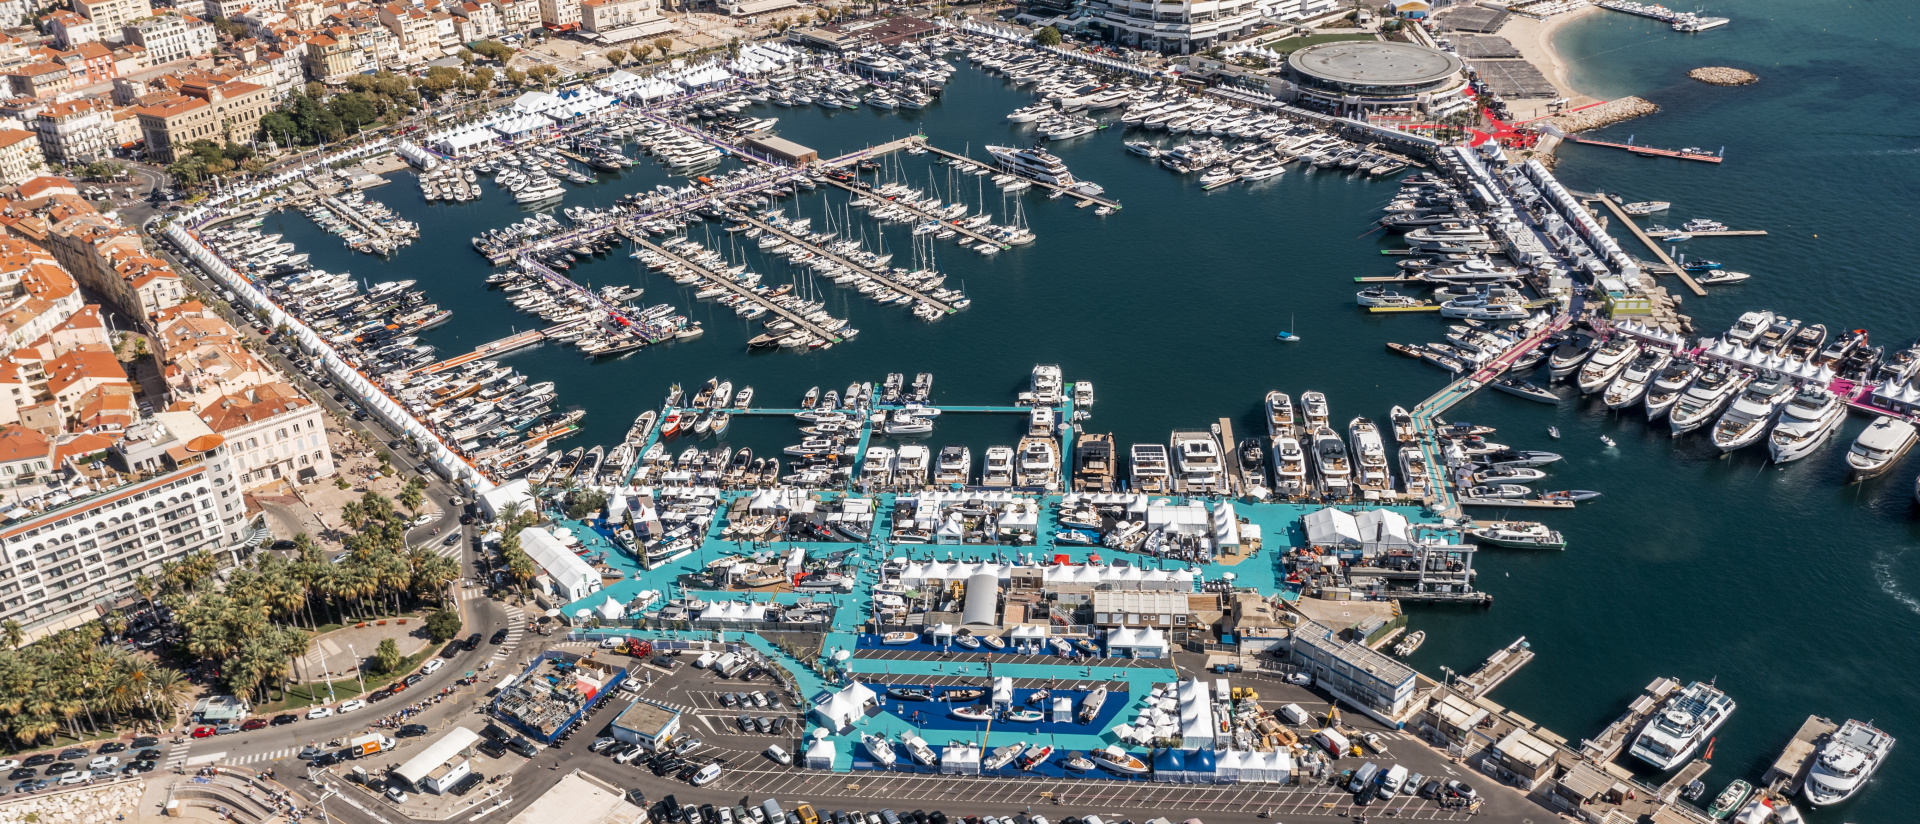 Cannes Yachting Festival 2022 DJI 0056 HDR